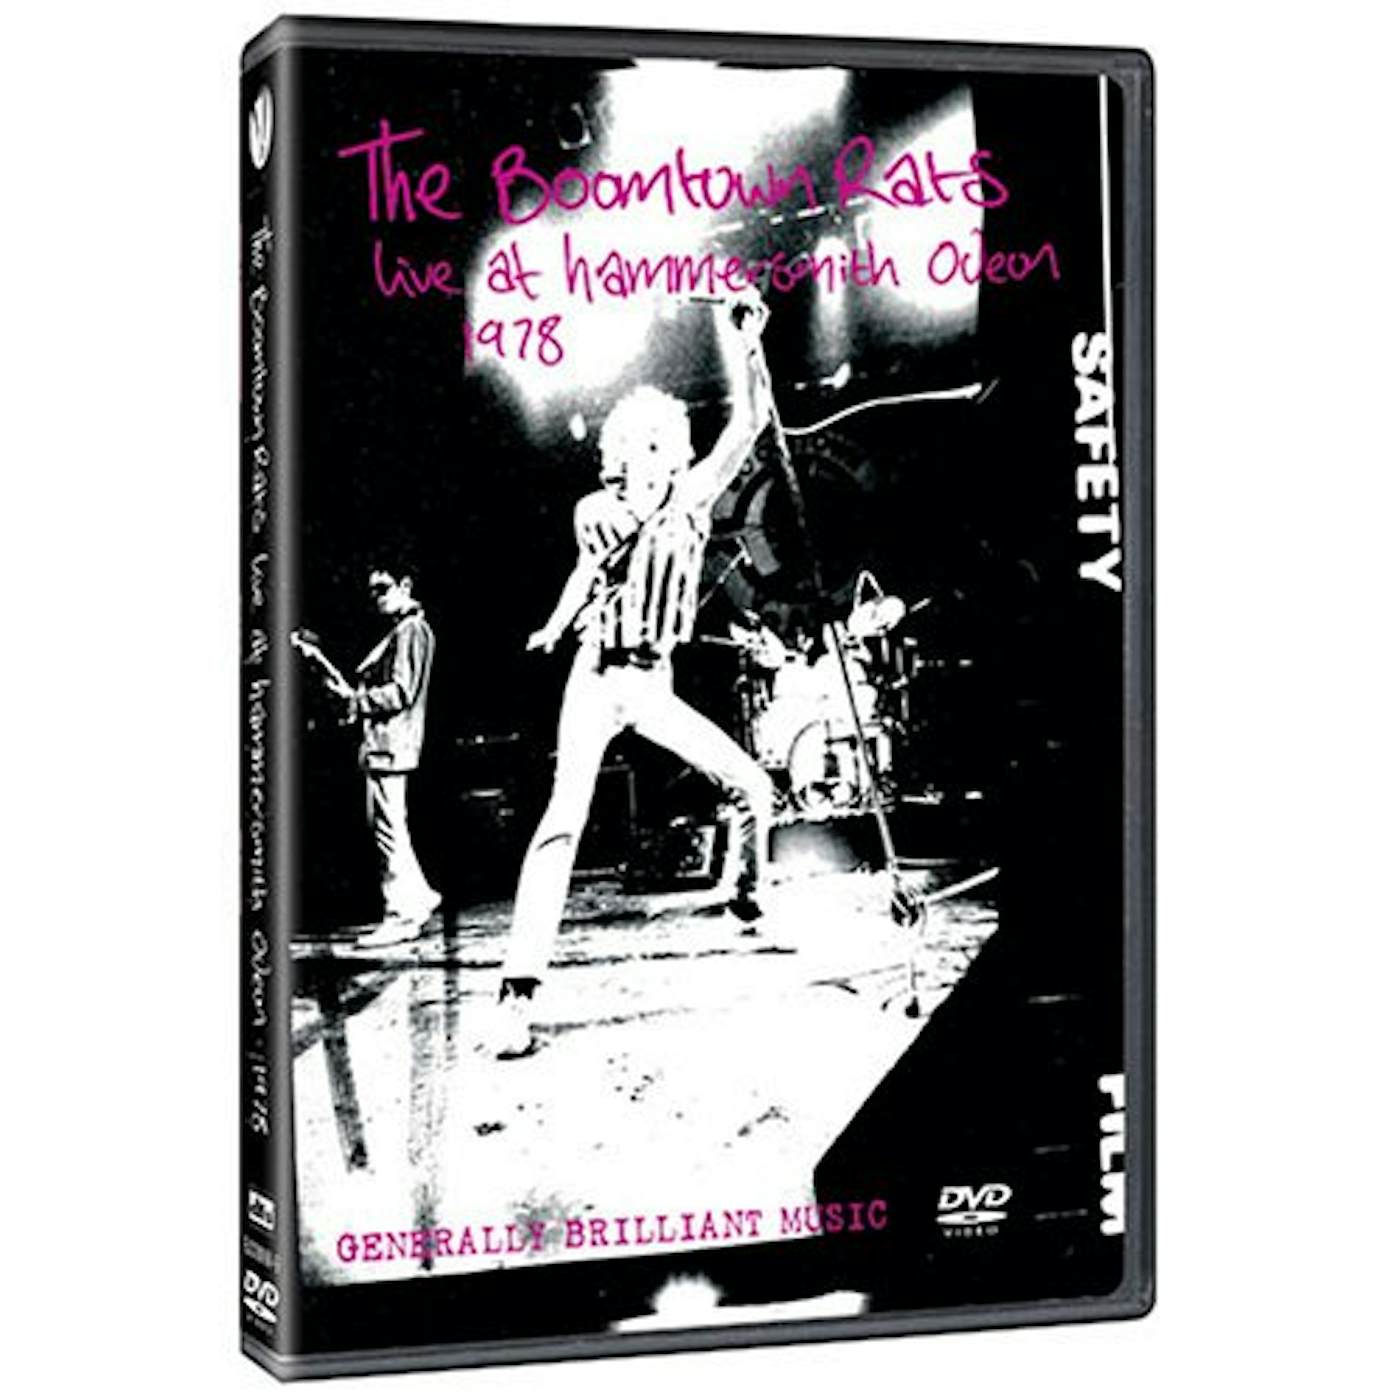 The Boomtown Rats LIVE AT HAMMERSMITH ODEON 1978 DVD